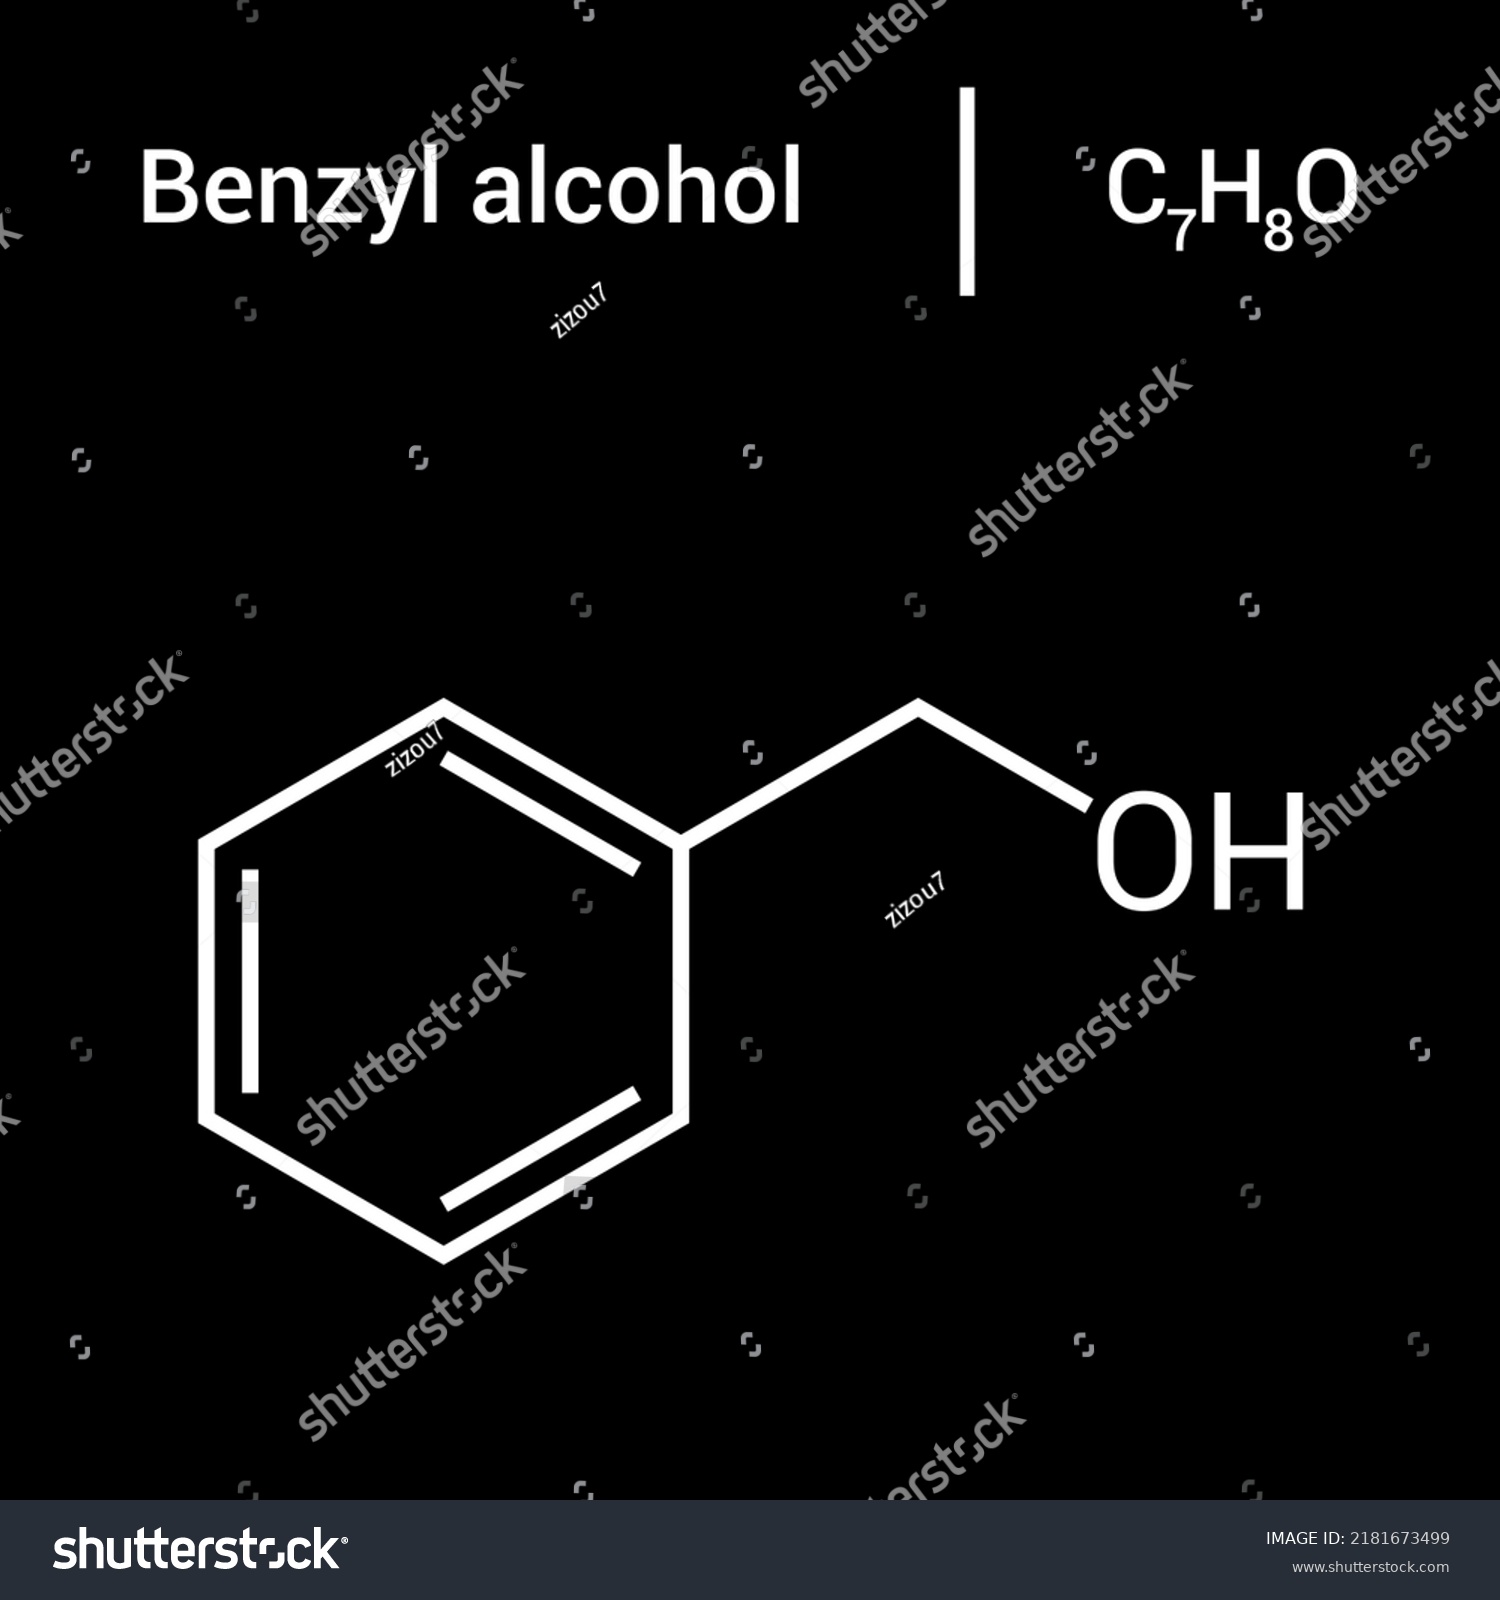 Chemical Structure Of Benzyl Alcohol C7h8o Royalty Free Stock